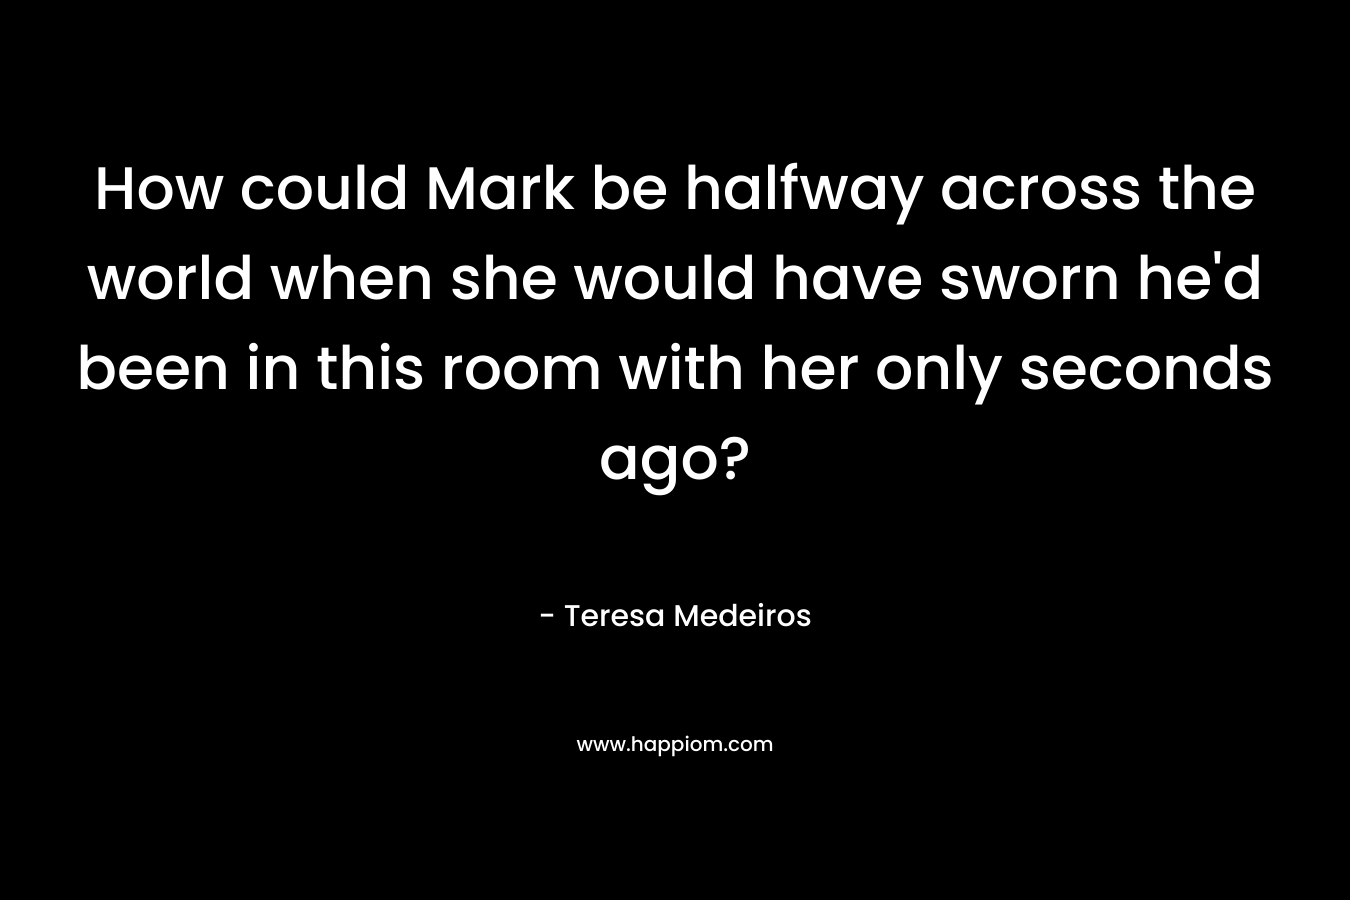 How could Mark be halfway across the world when she would have sworn he’d been in this room with her only seconds ago? – Teresa Medeiros